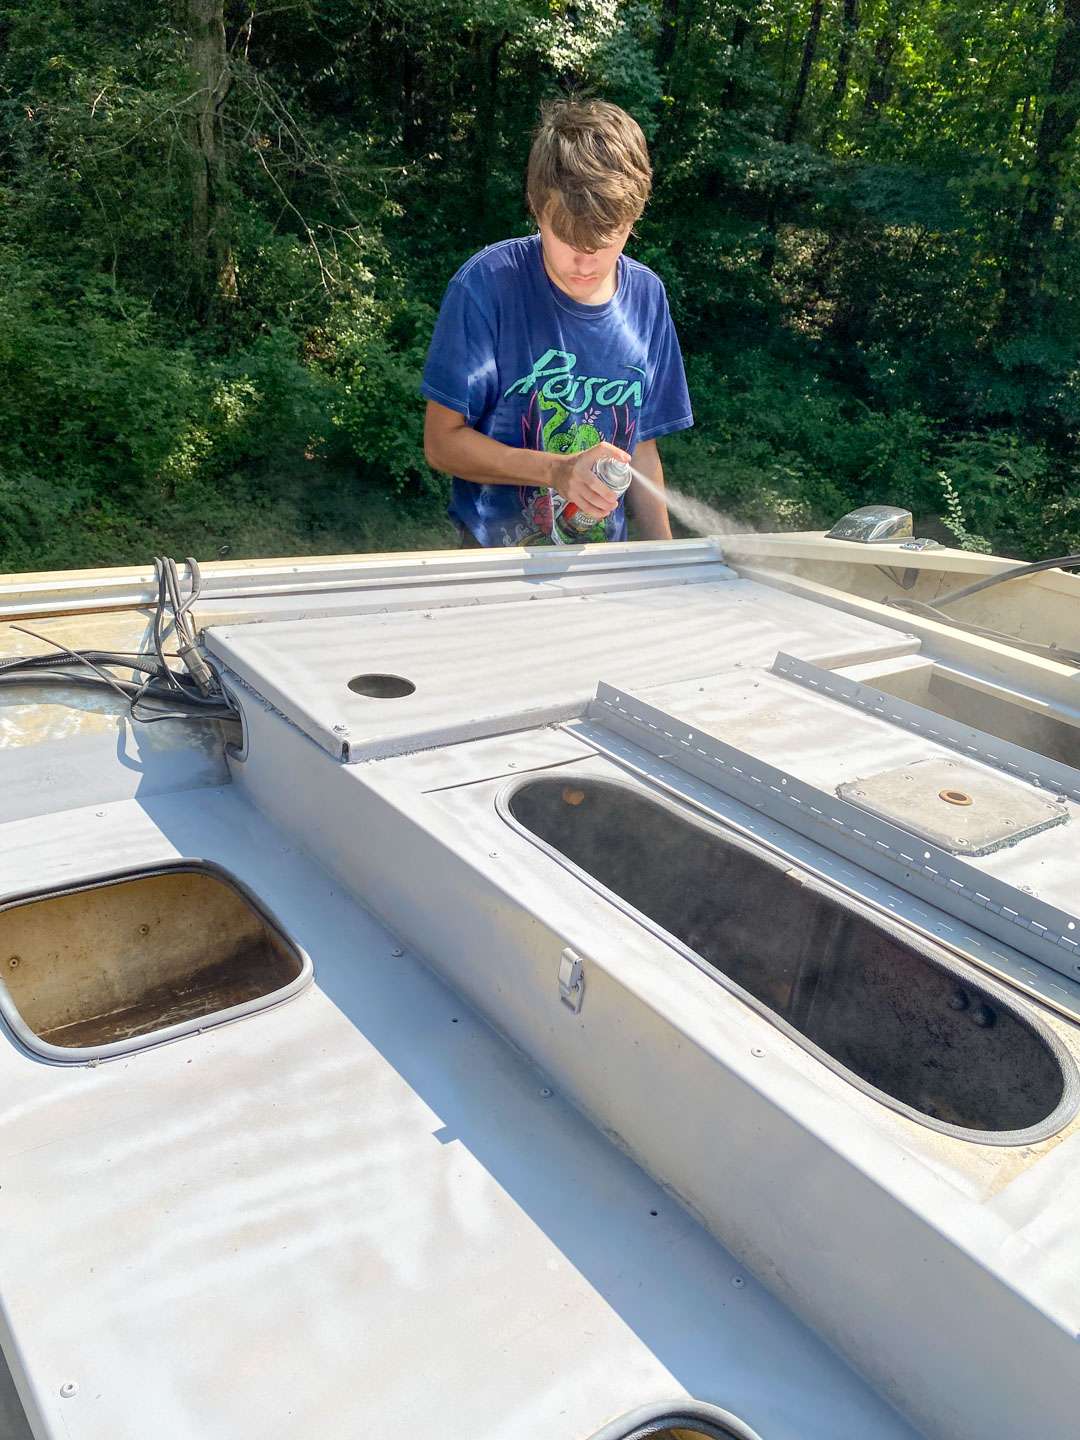 As I mentioned, Iâm not a professional painter. Because we are only worried about the functionality of the boat and do not plan on putting it on a showroom floor, priming and painting the interior was about coverage, not perfection. Plus, the majority of the decks and floors would be covered in SeaDek.